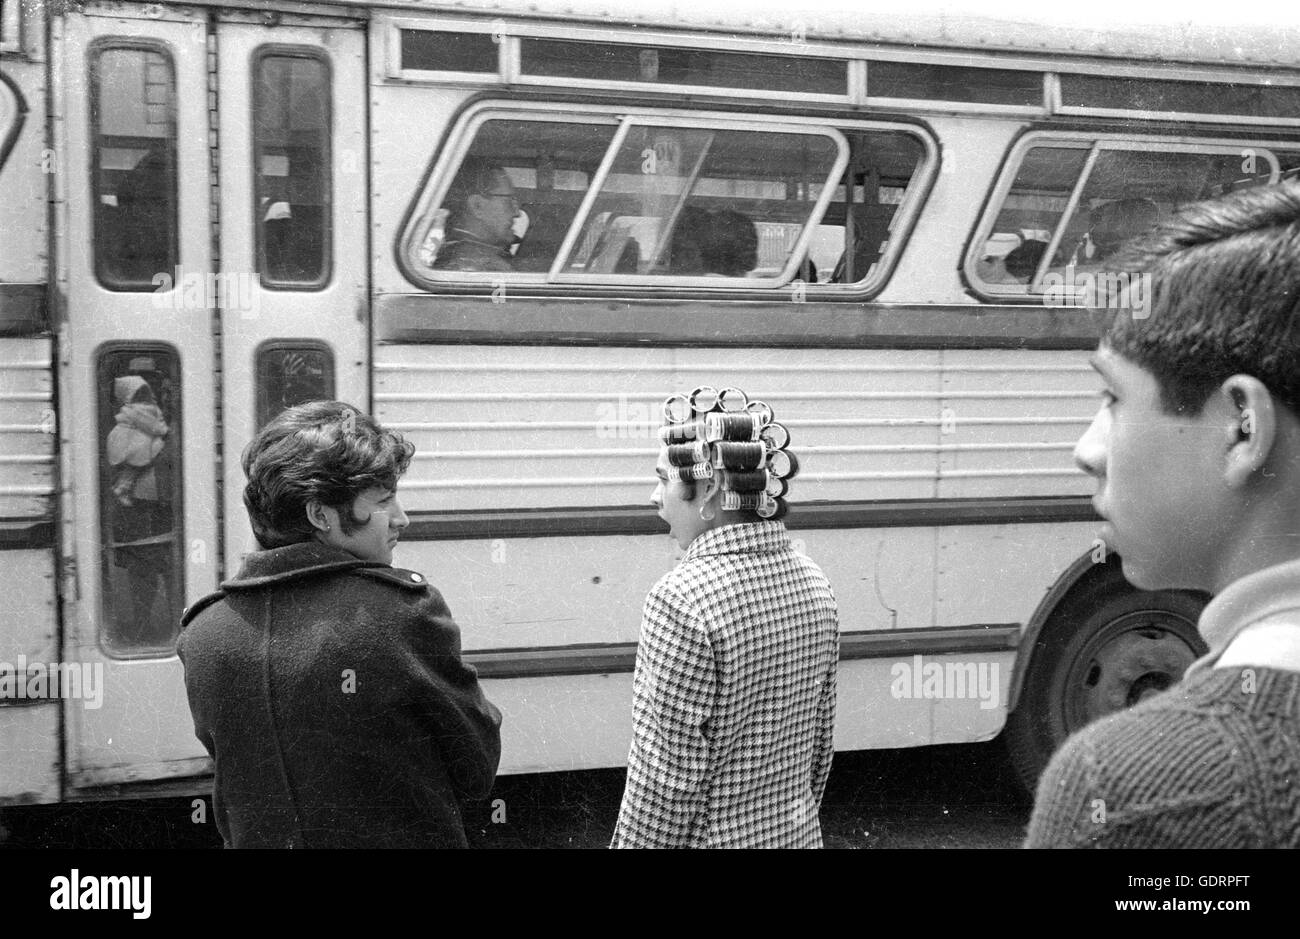 Passersby on a city bus in Mexico City, 1970 Stock Photo